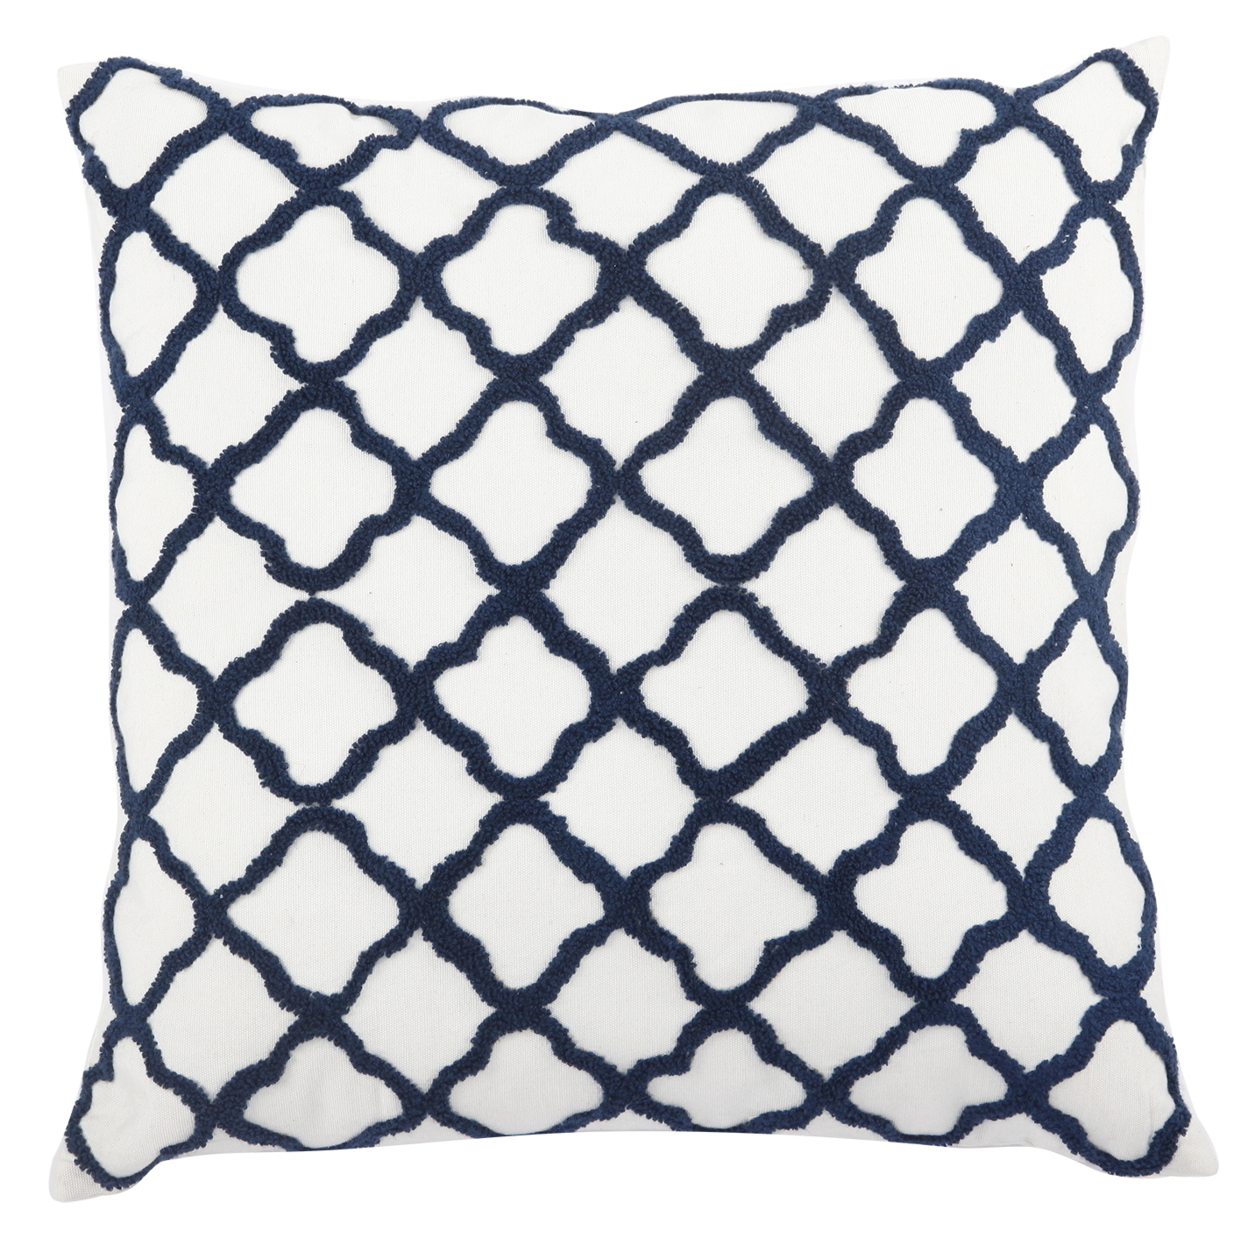 20 X 14 Inch Lattice Embroidered Feather Fill Pillow, Set Of 2,White And Blue- Saltoro Sherpi